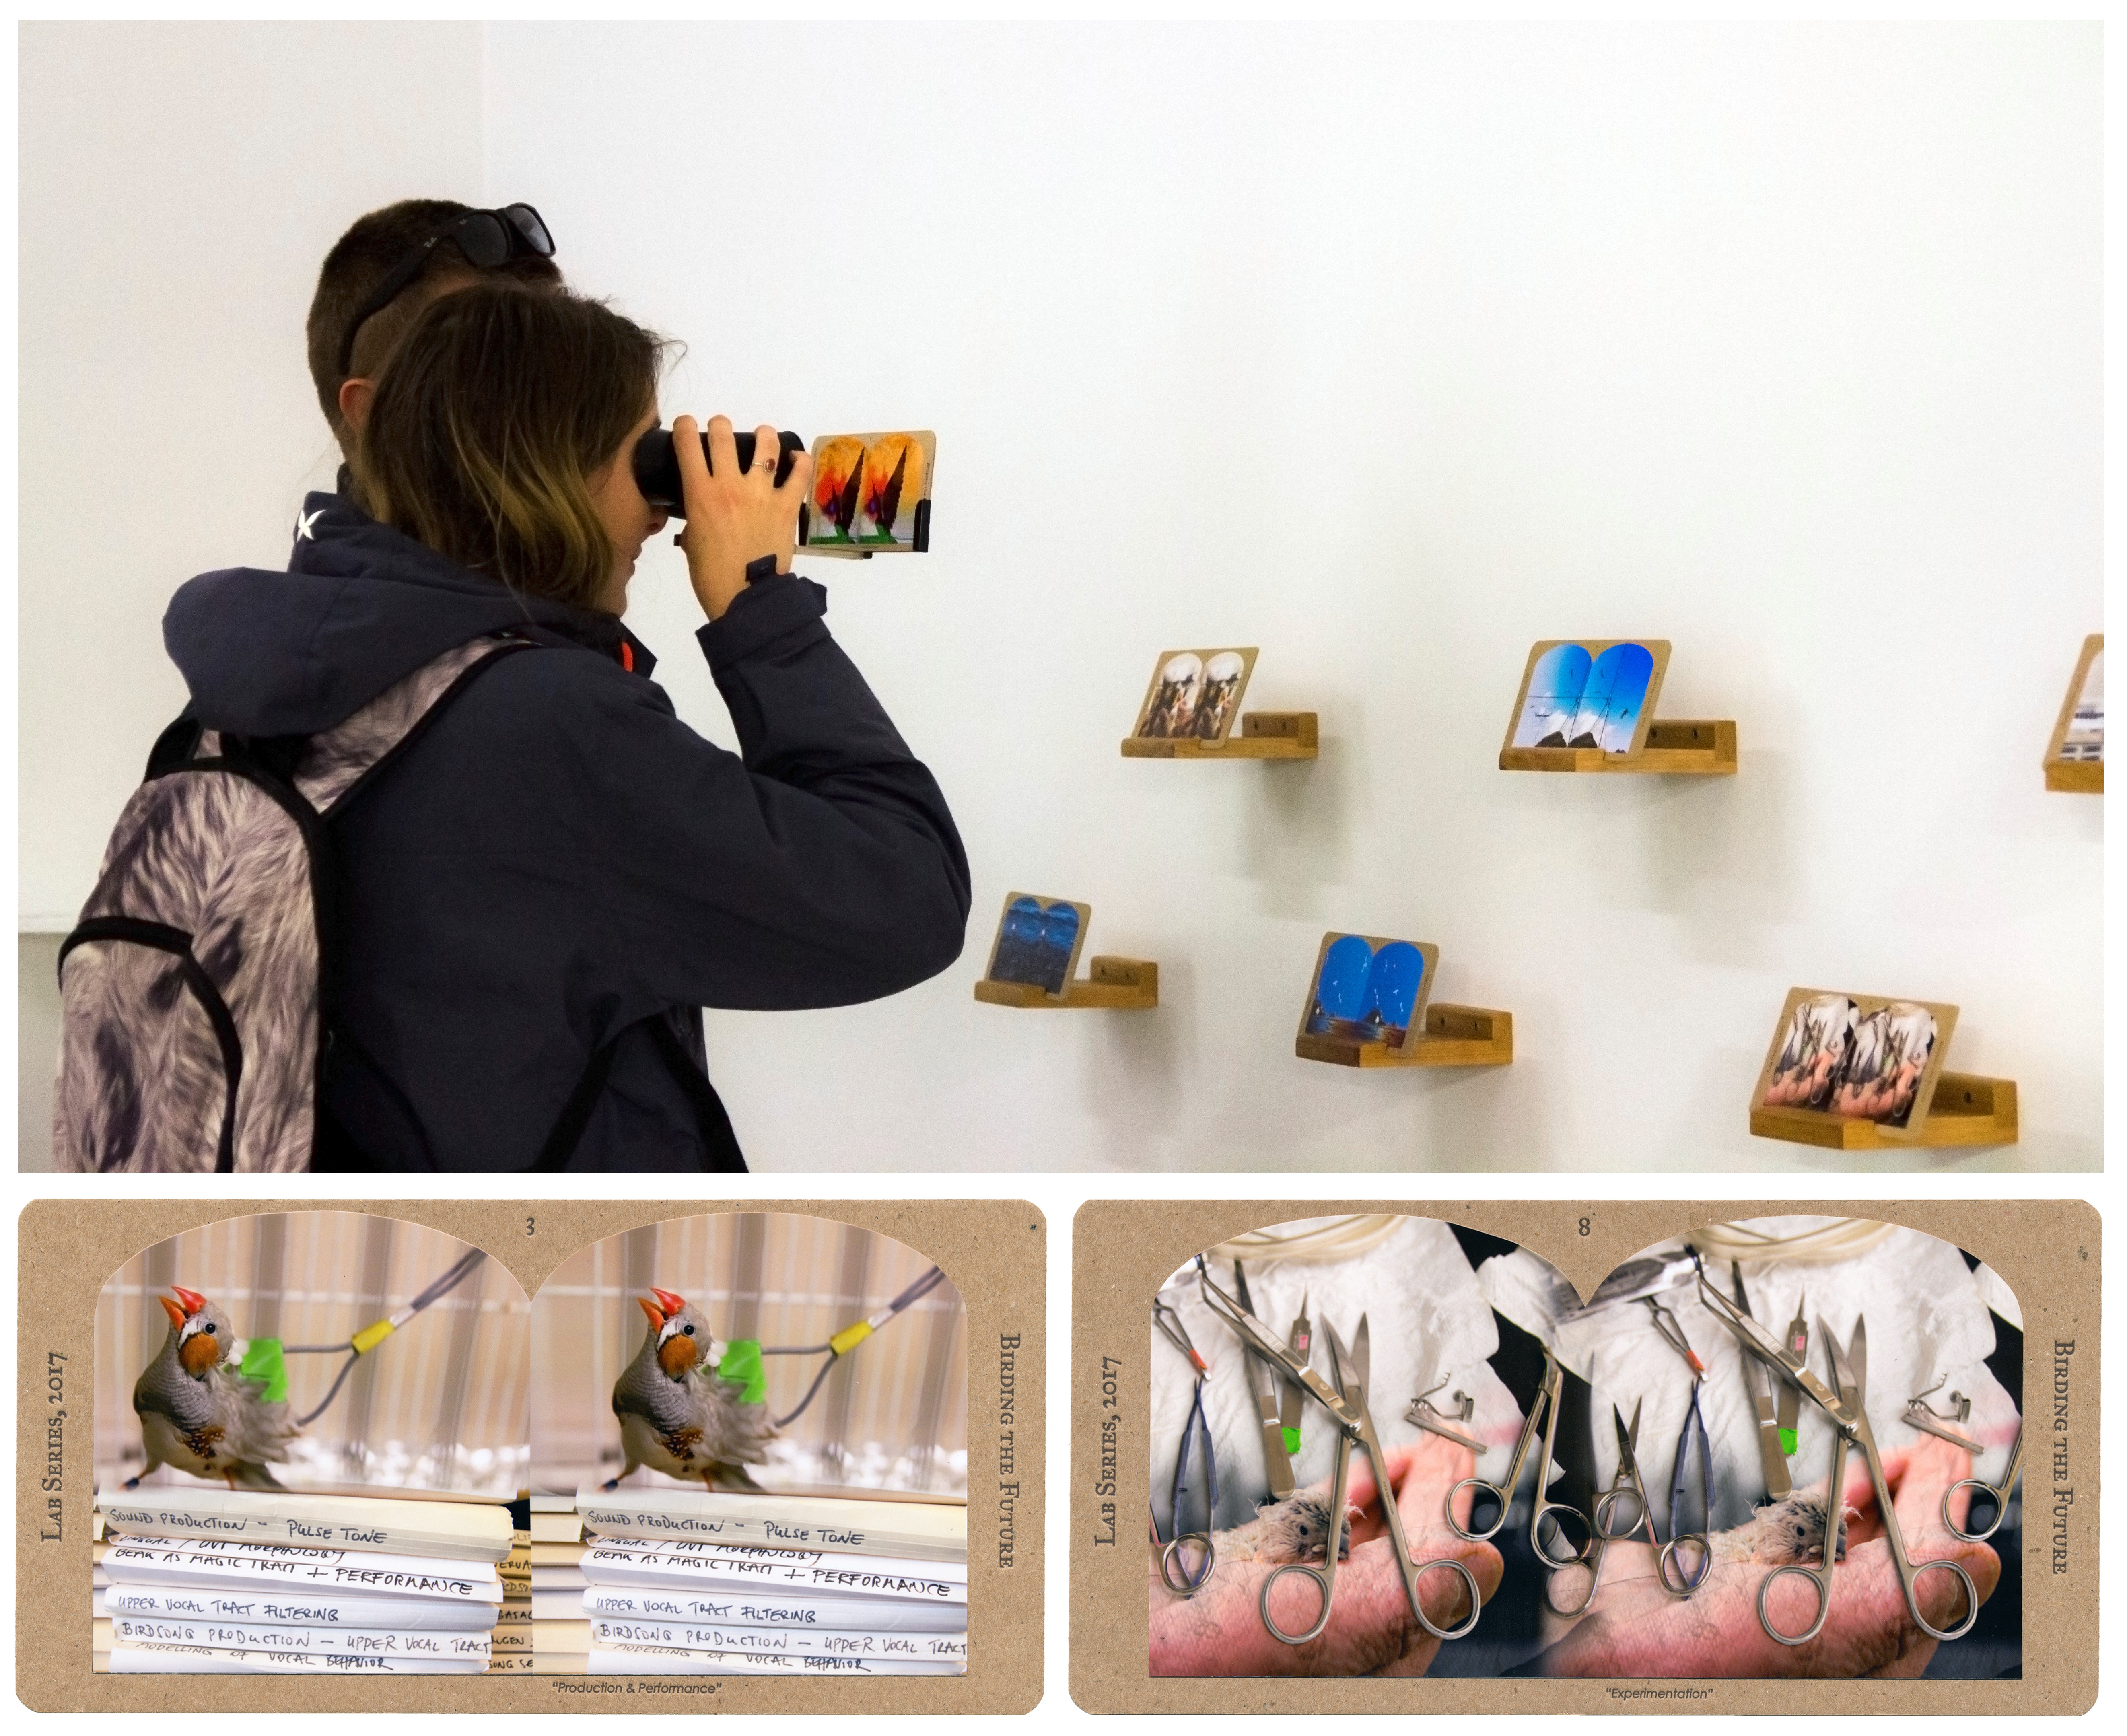 A person holds a stereoscope at an exhibit.